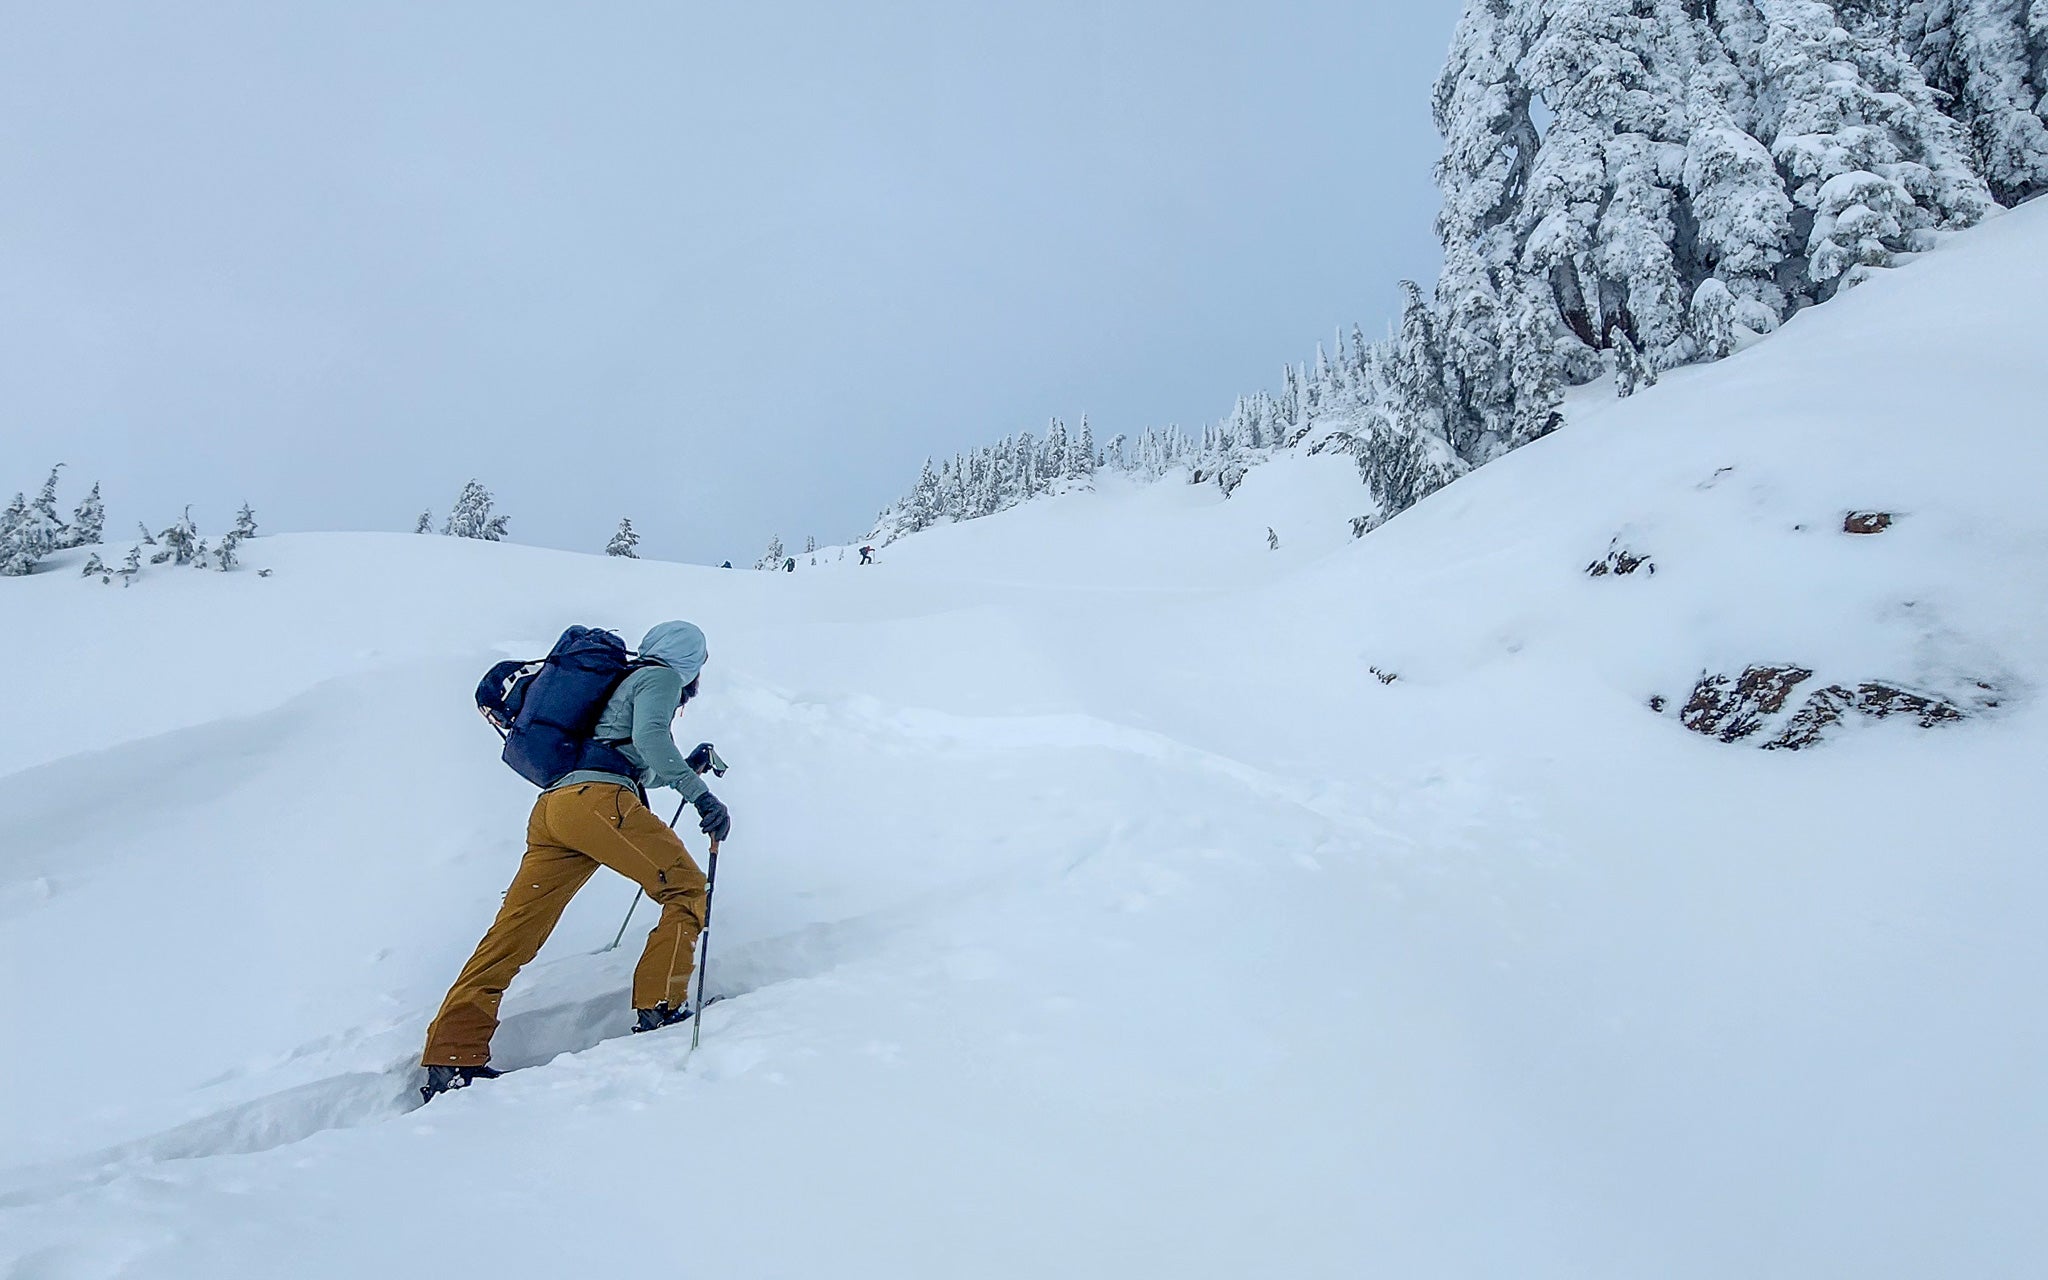 Skinning up Mt Herman in the Mt Baker Heather Meadows Backcountry